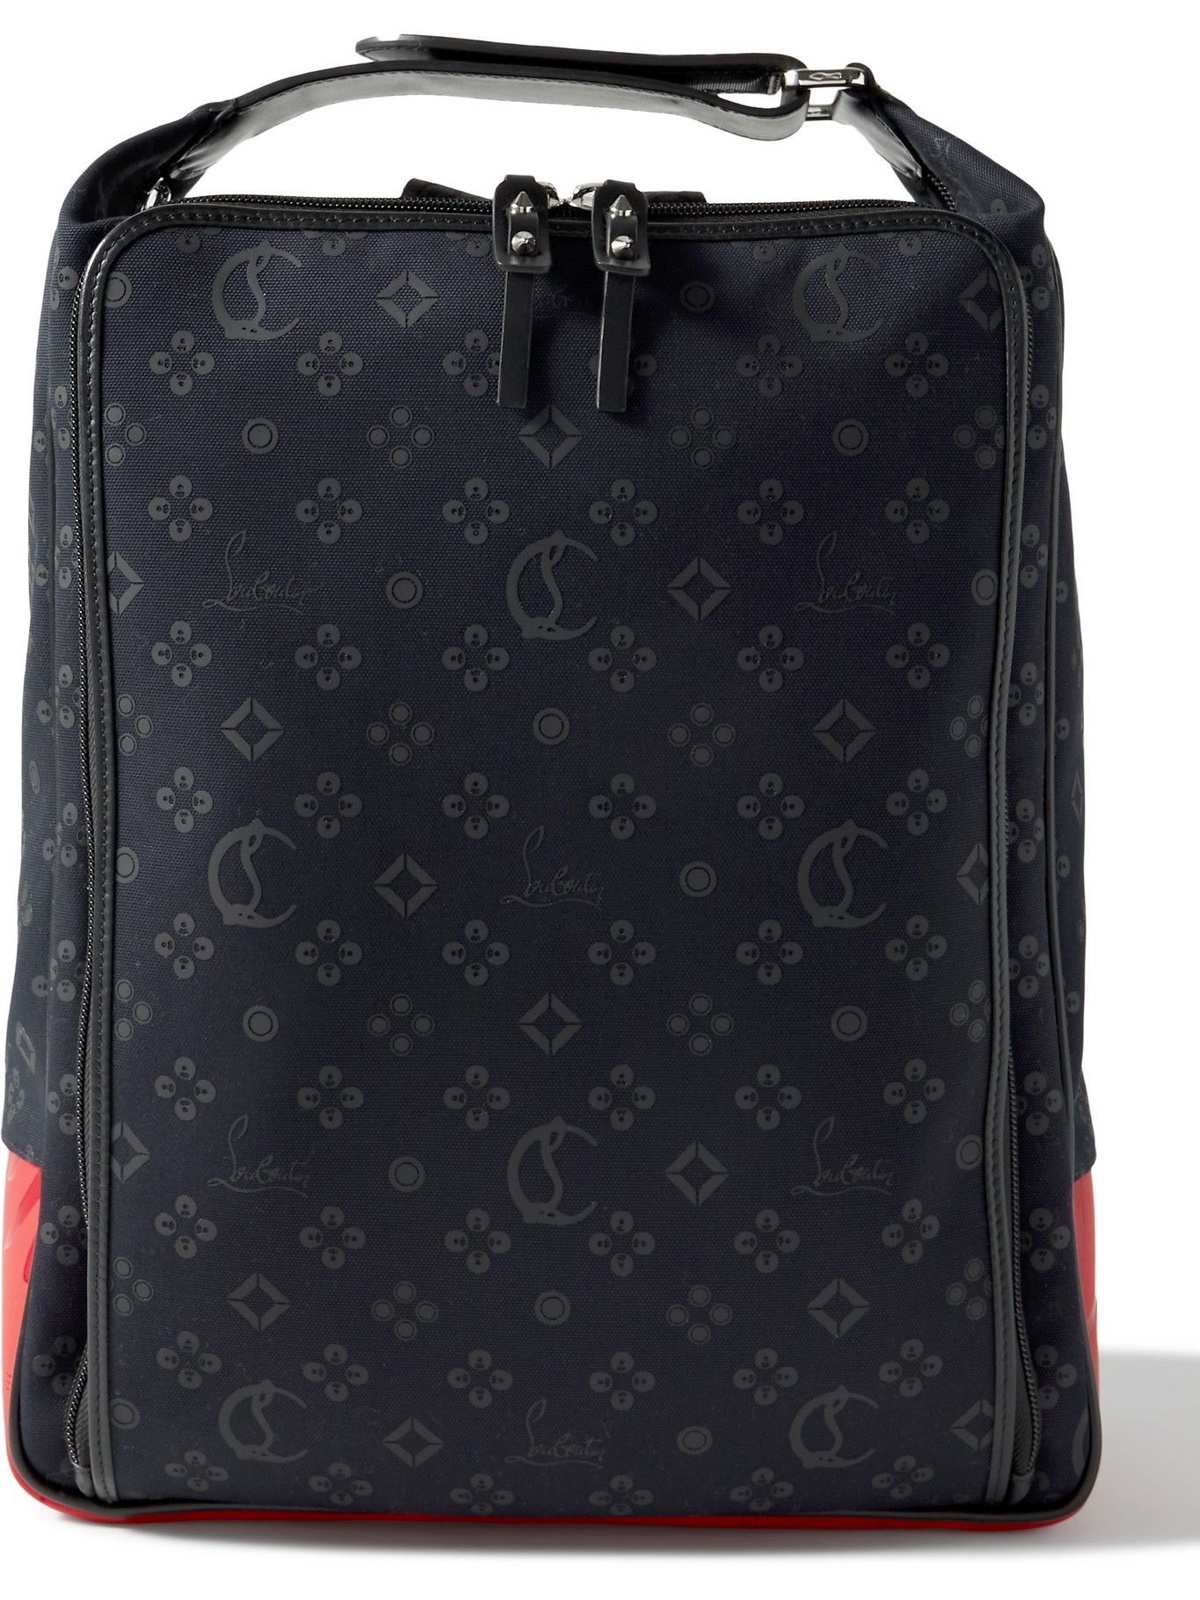 NEW WITH CL STORE RECEIPT CHRISTIAN LOUBOUTIN PYTHON EXPLORAFUNK BACKPACK  BAG